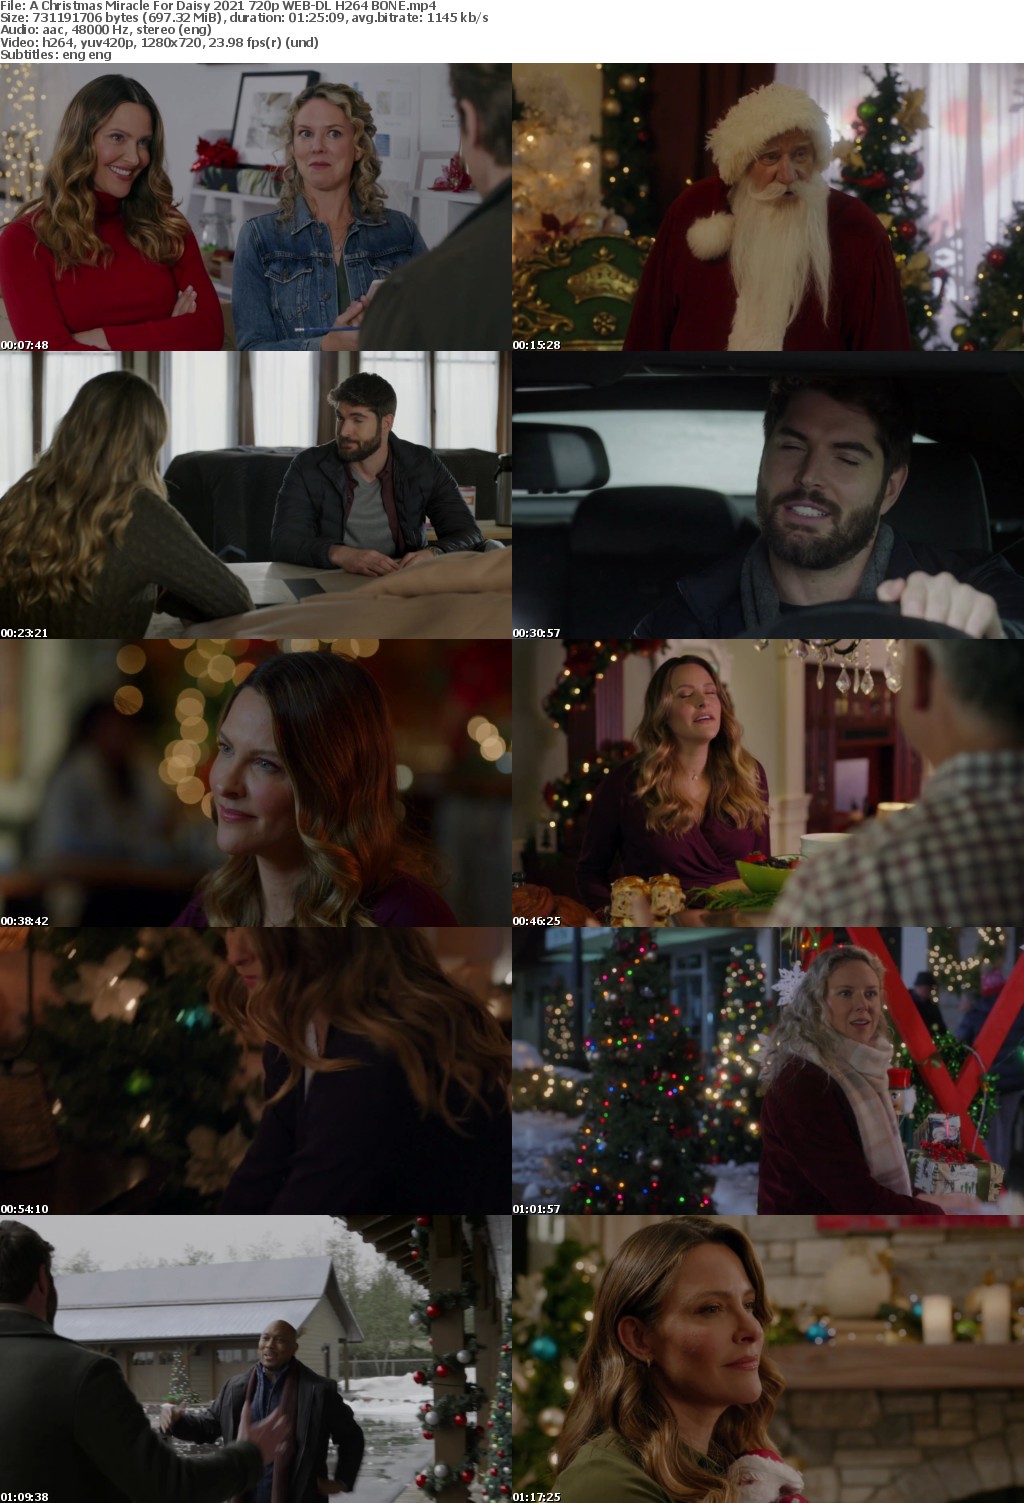 A Christmas Miracle For Daisy 2021 720p WEB-DL H264 BONE